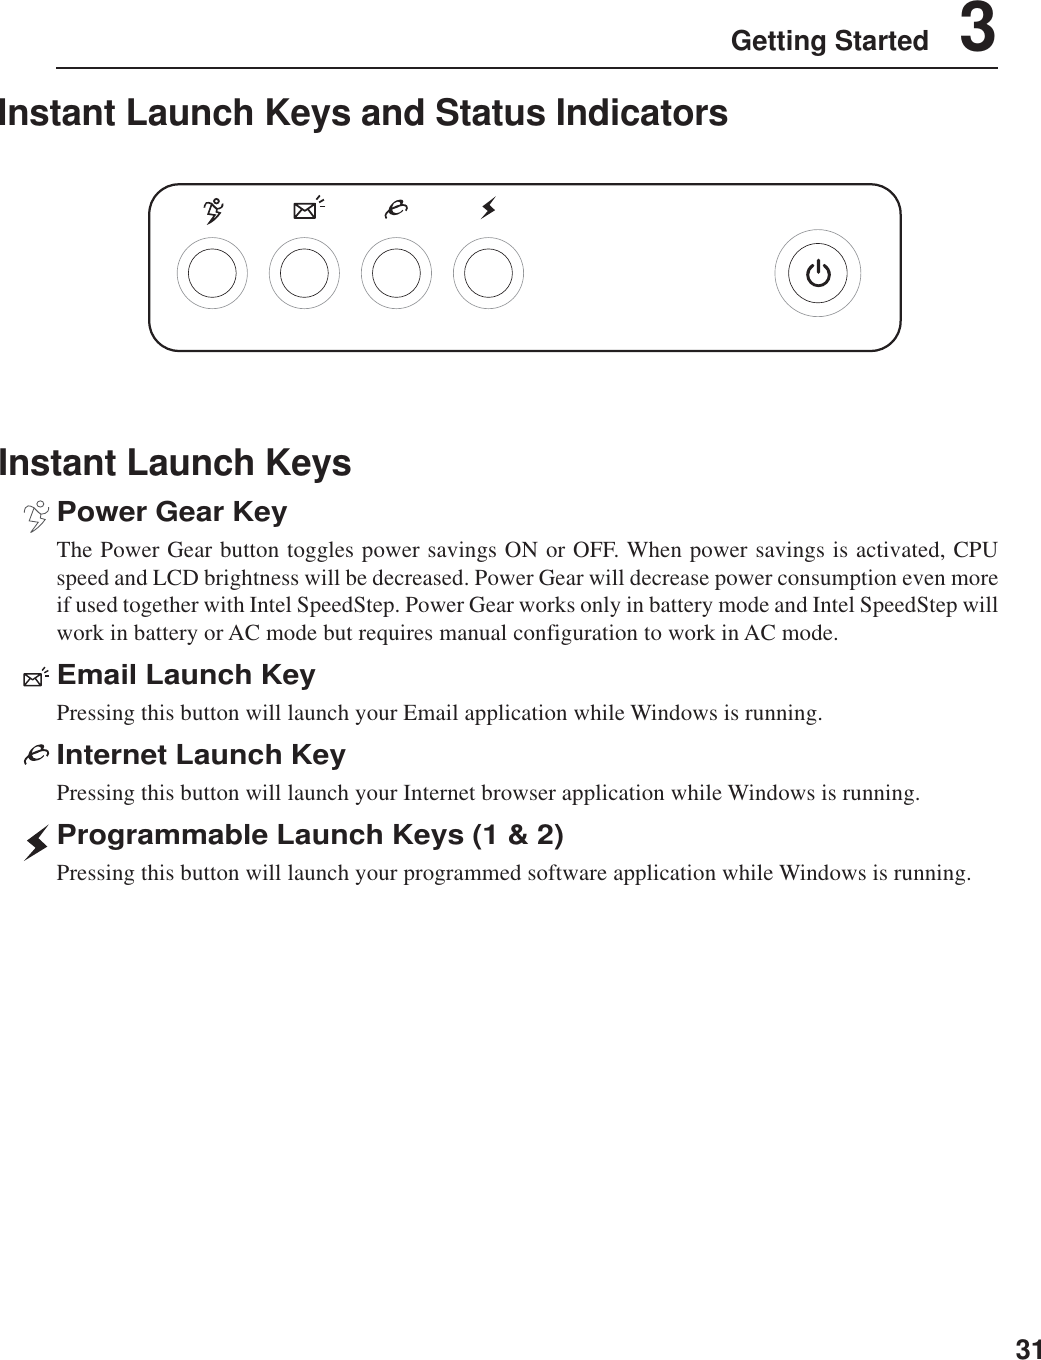 31Getting Started    3Instant Launch KeysPower Gear KeyThe Power Gear button toggles power savings ON or OFF. When power savings is activated, CPUspeed and LCD brightness will be decreased. Power Gear will decrease power consumption even moreif used together with Intel SpeedStep. Power Gear works only in battery mode and Intel SpeedStep willwork in battery or AC mode but requires manual configuration to work in AC mode.Email Launch KeyPressing this button will launch your Email application while Windows is running.Internet Launch KeyPressing this button will launch your Internet browser application while Windows is running.Programmable Launch Keys (1 &amp; 2)Pressing this button will launch your programmed software application while Windows is running.Instant Launch Keys and Status Indicators